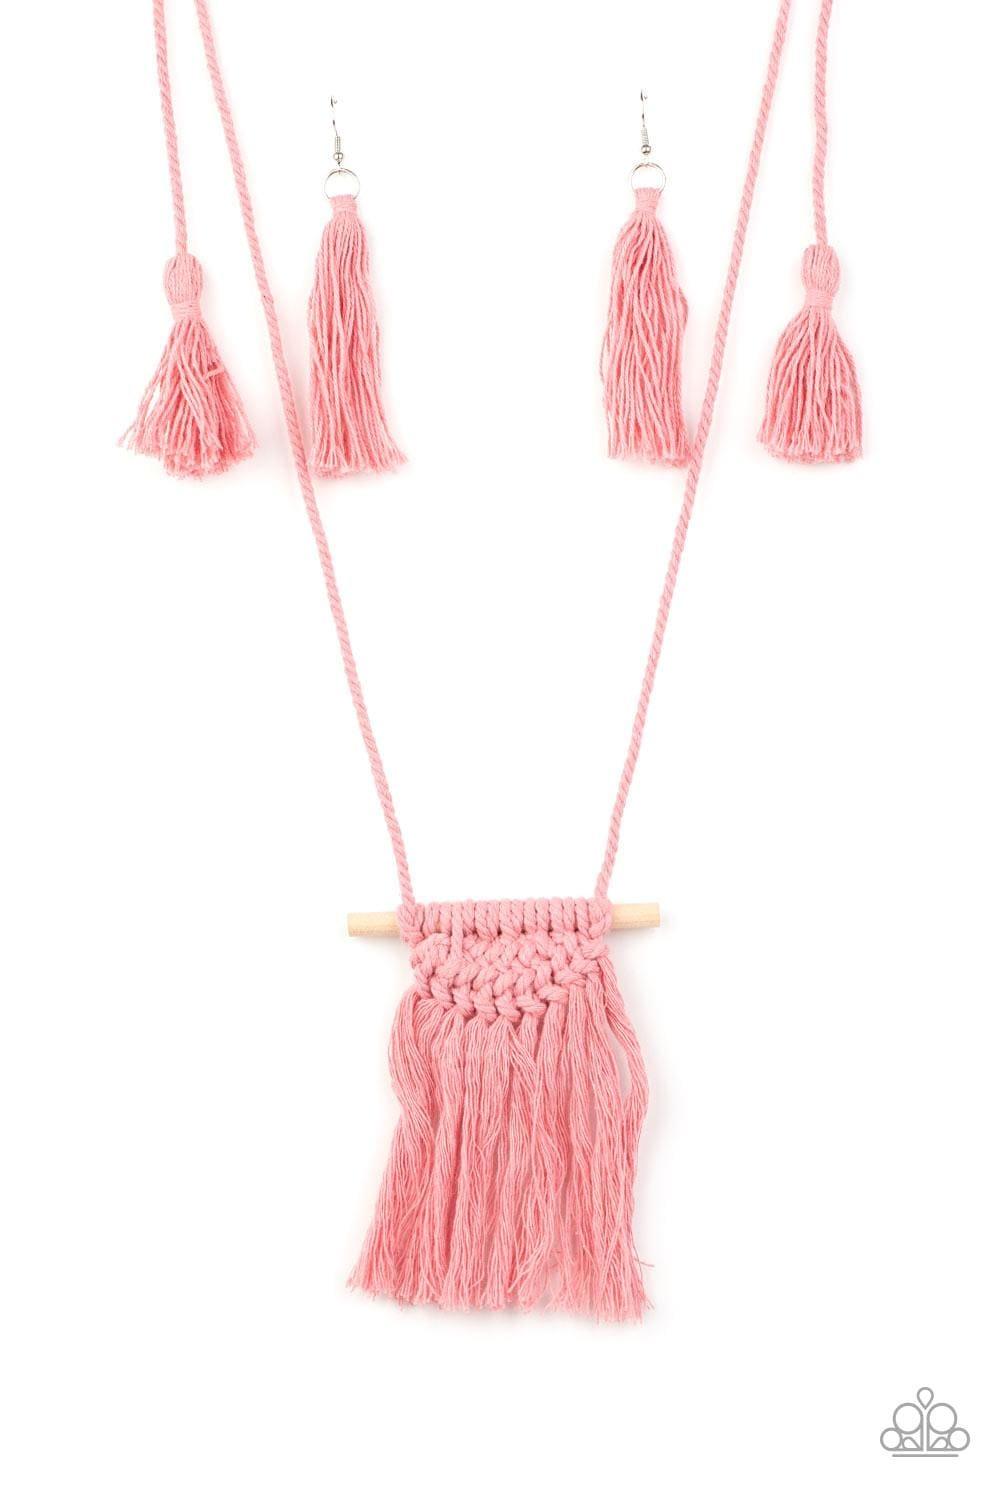 Paparazzi Accessories - Between You And Macrame - Pink Necklace - Bling by JessieK